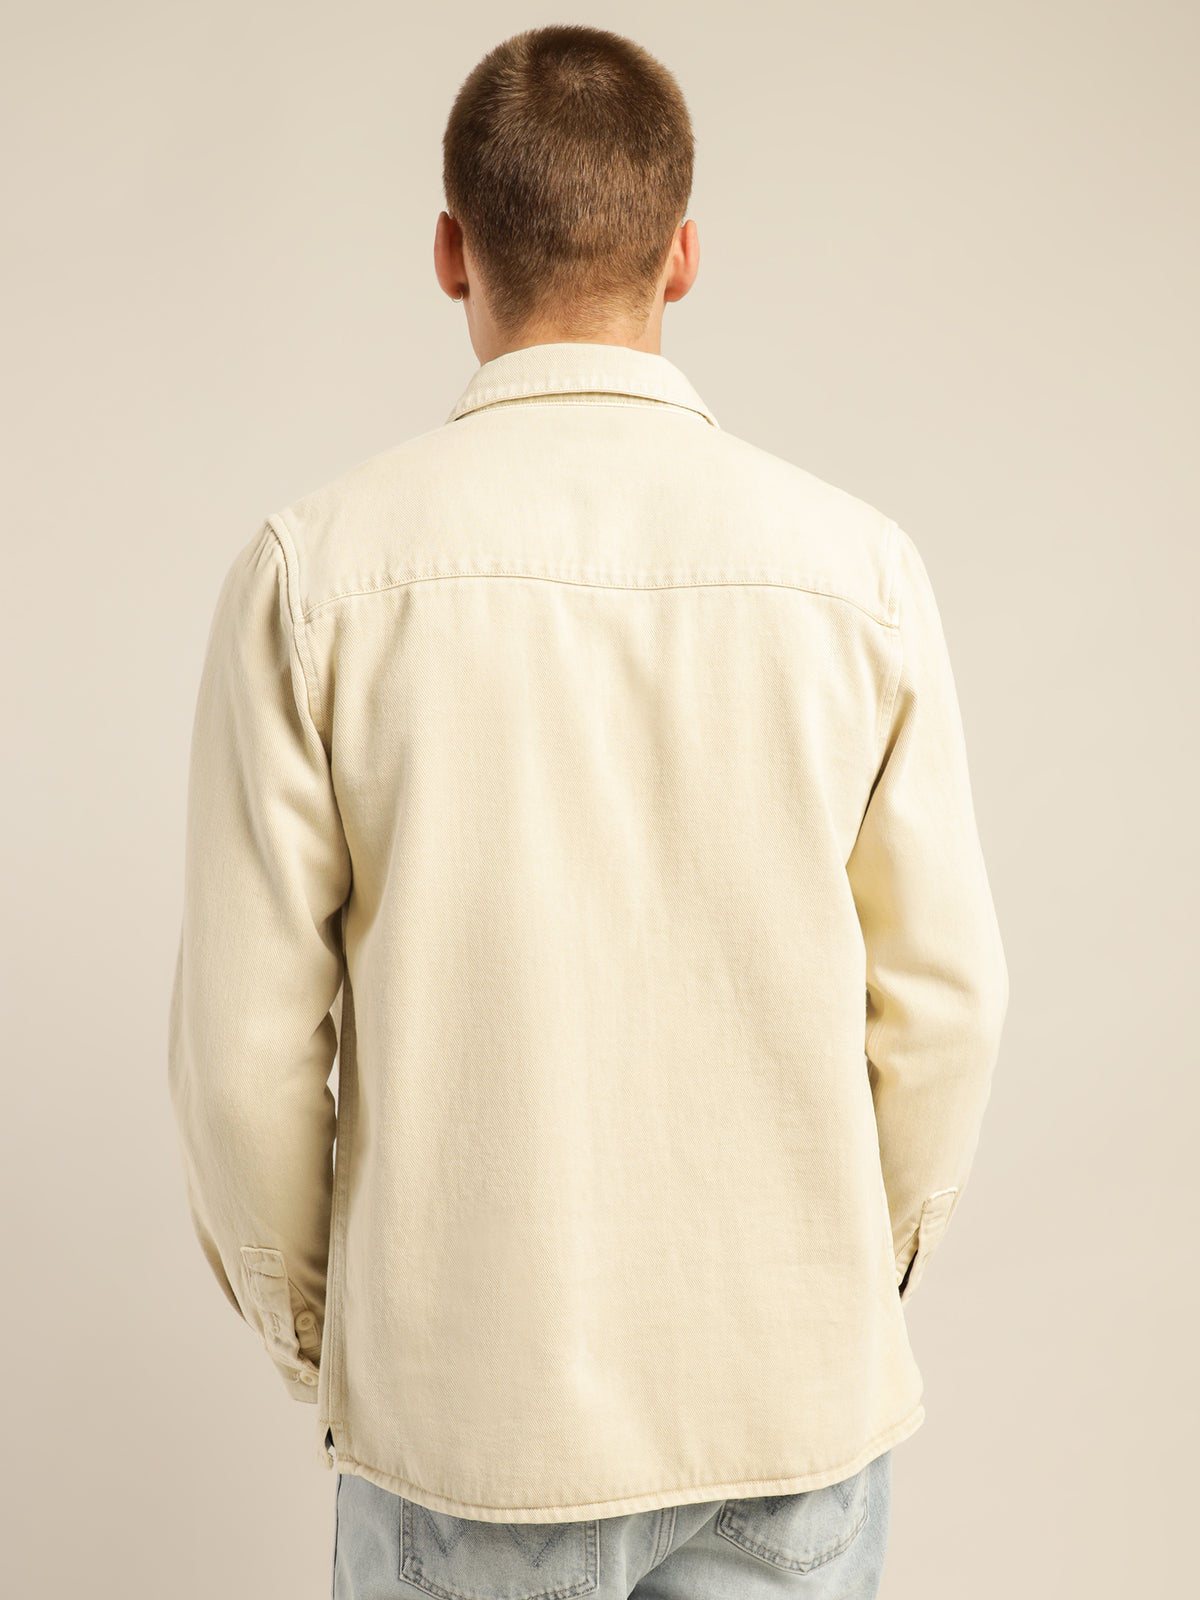 Essential Overshirt in Winter White